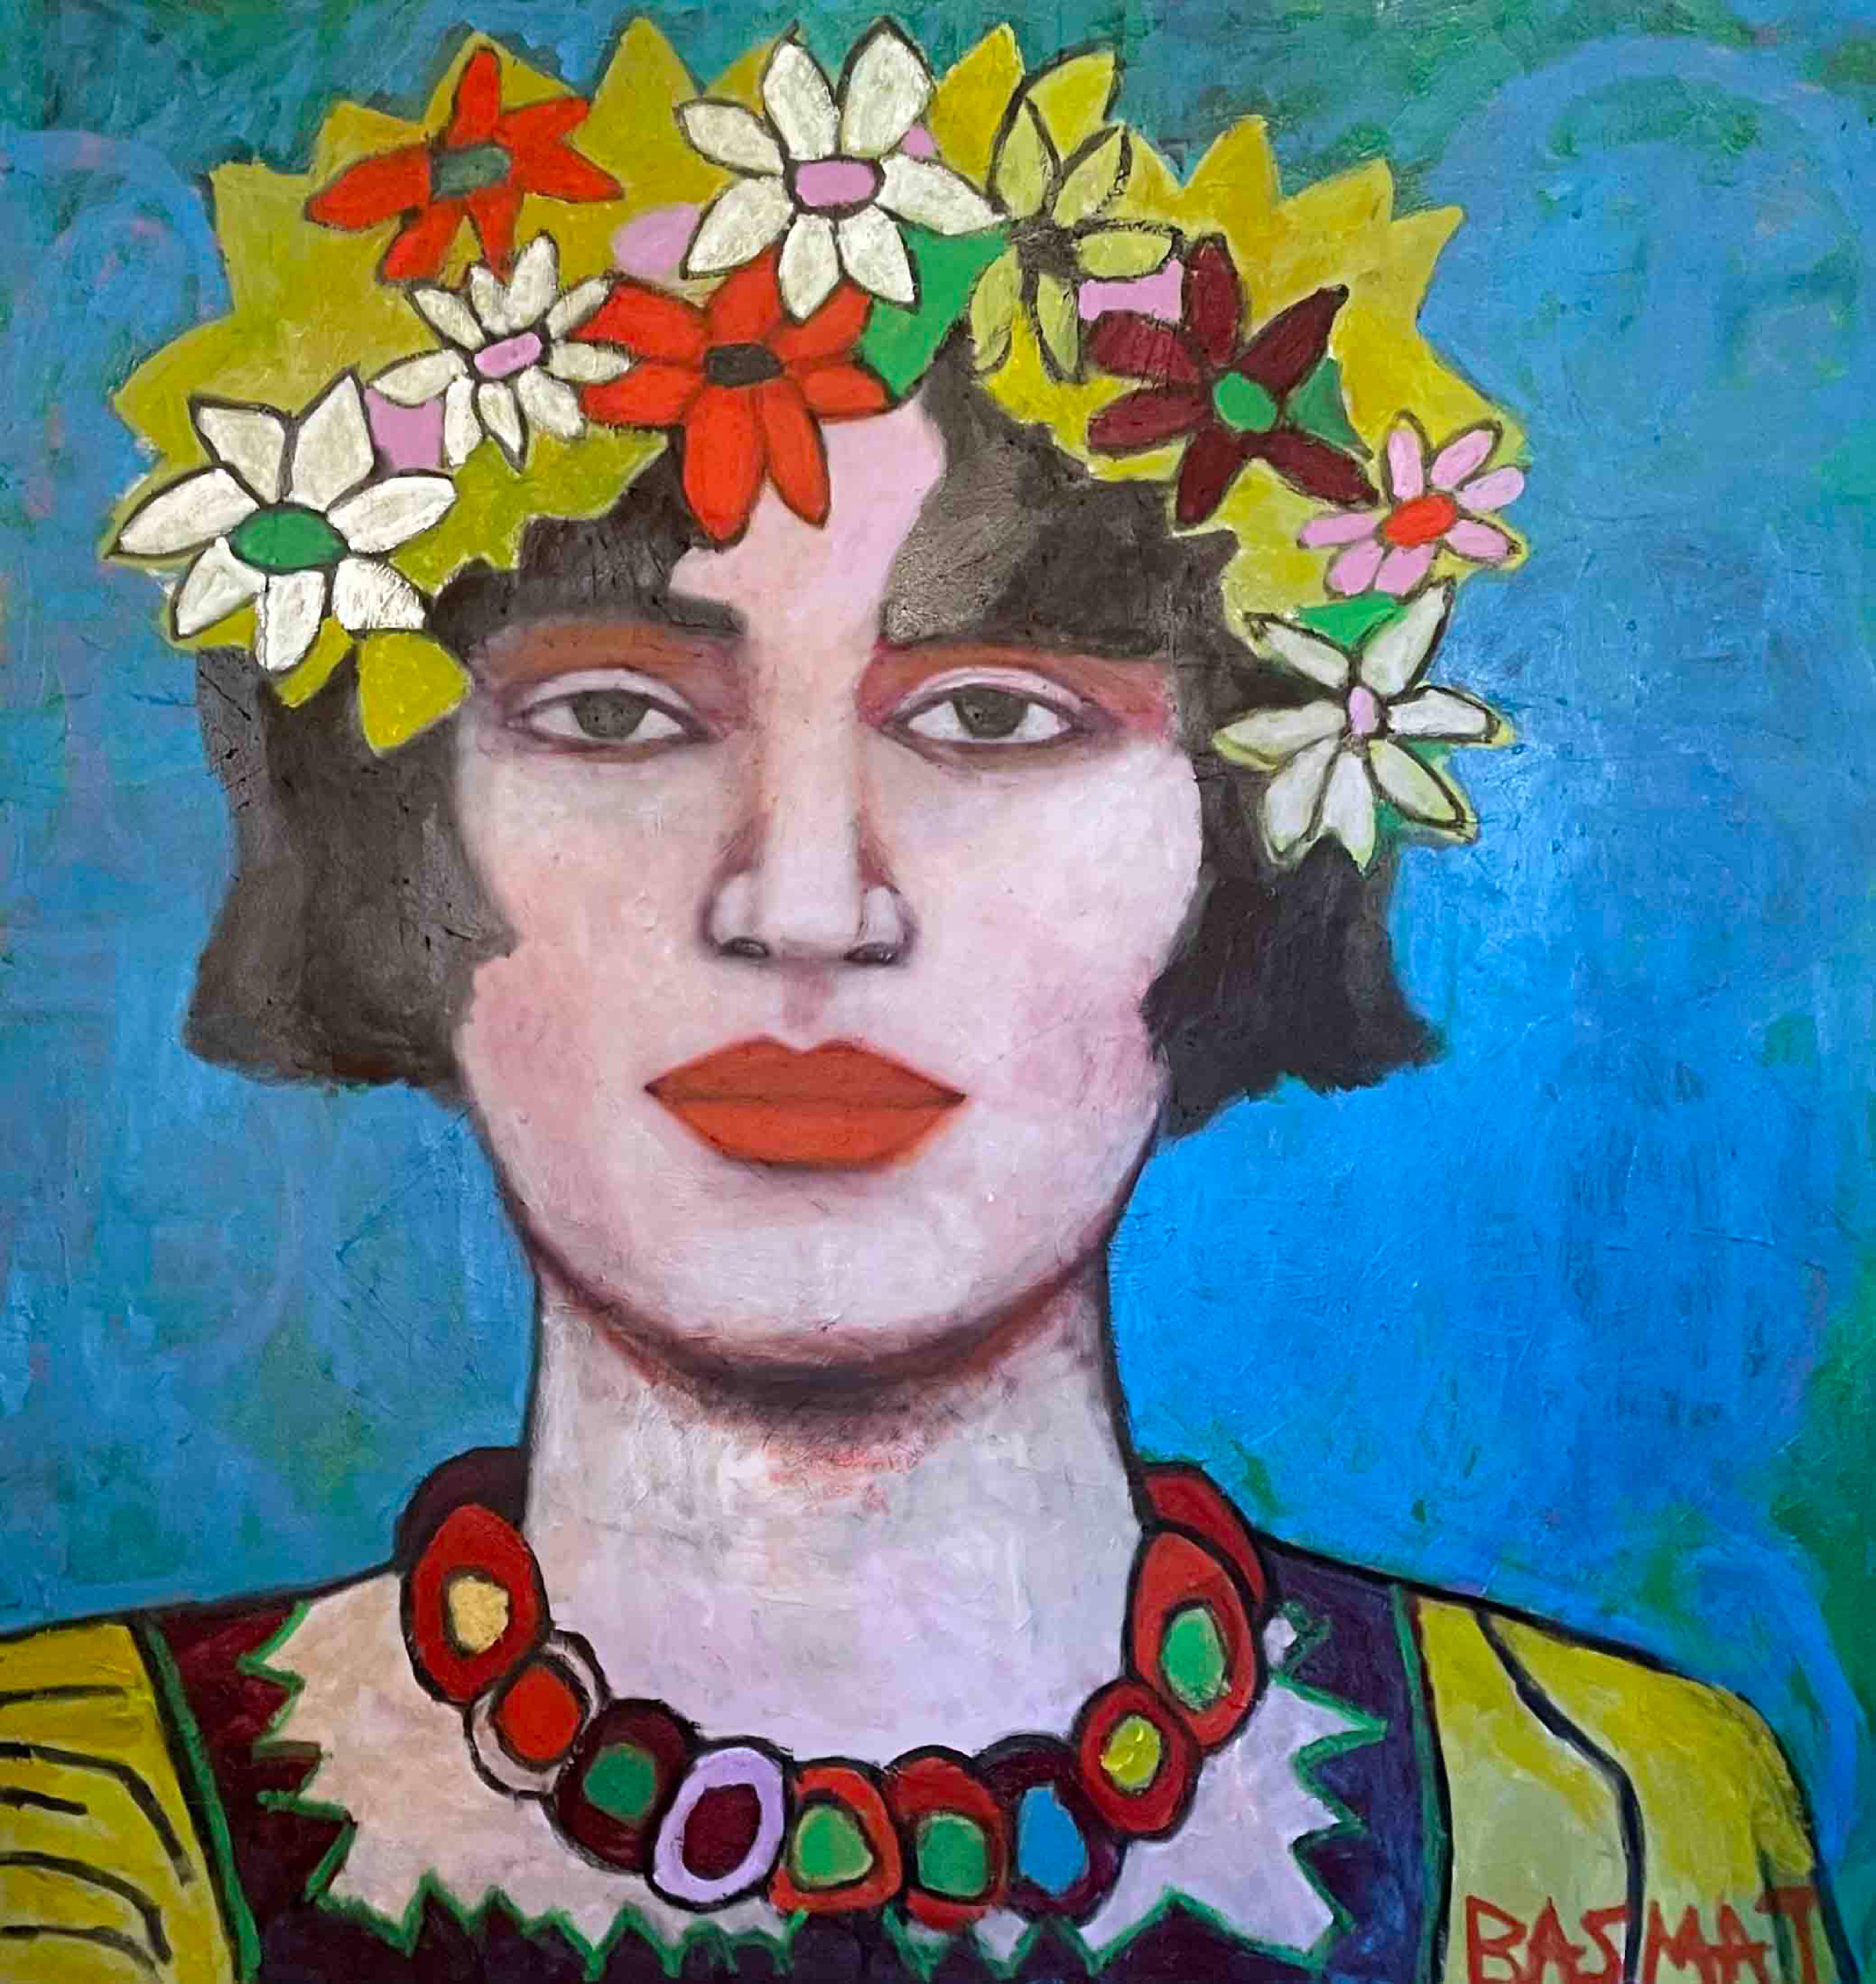 Basmat Levin Abstract Print - Pippa Portrait with Flowers Painting Print Edition on Canvas Square Format